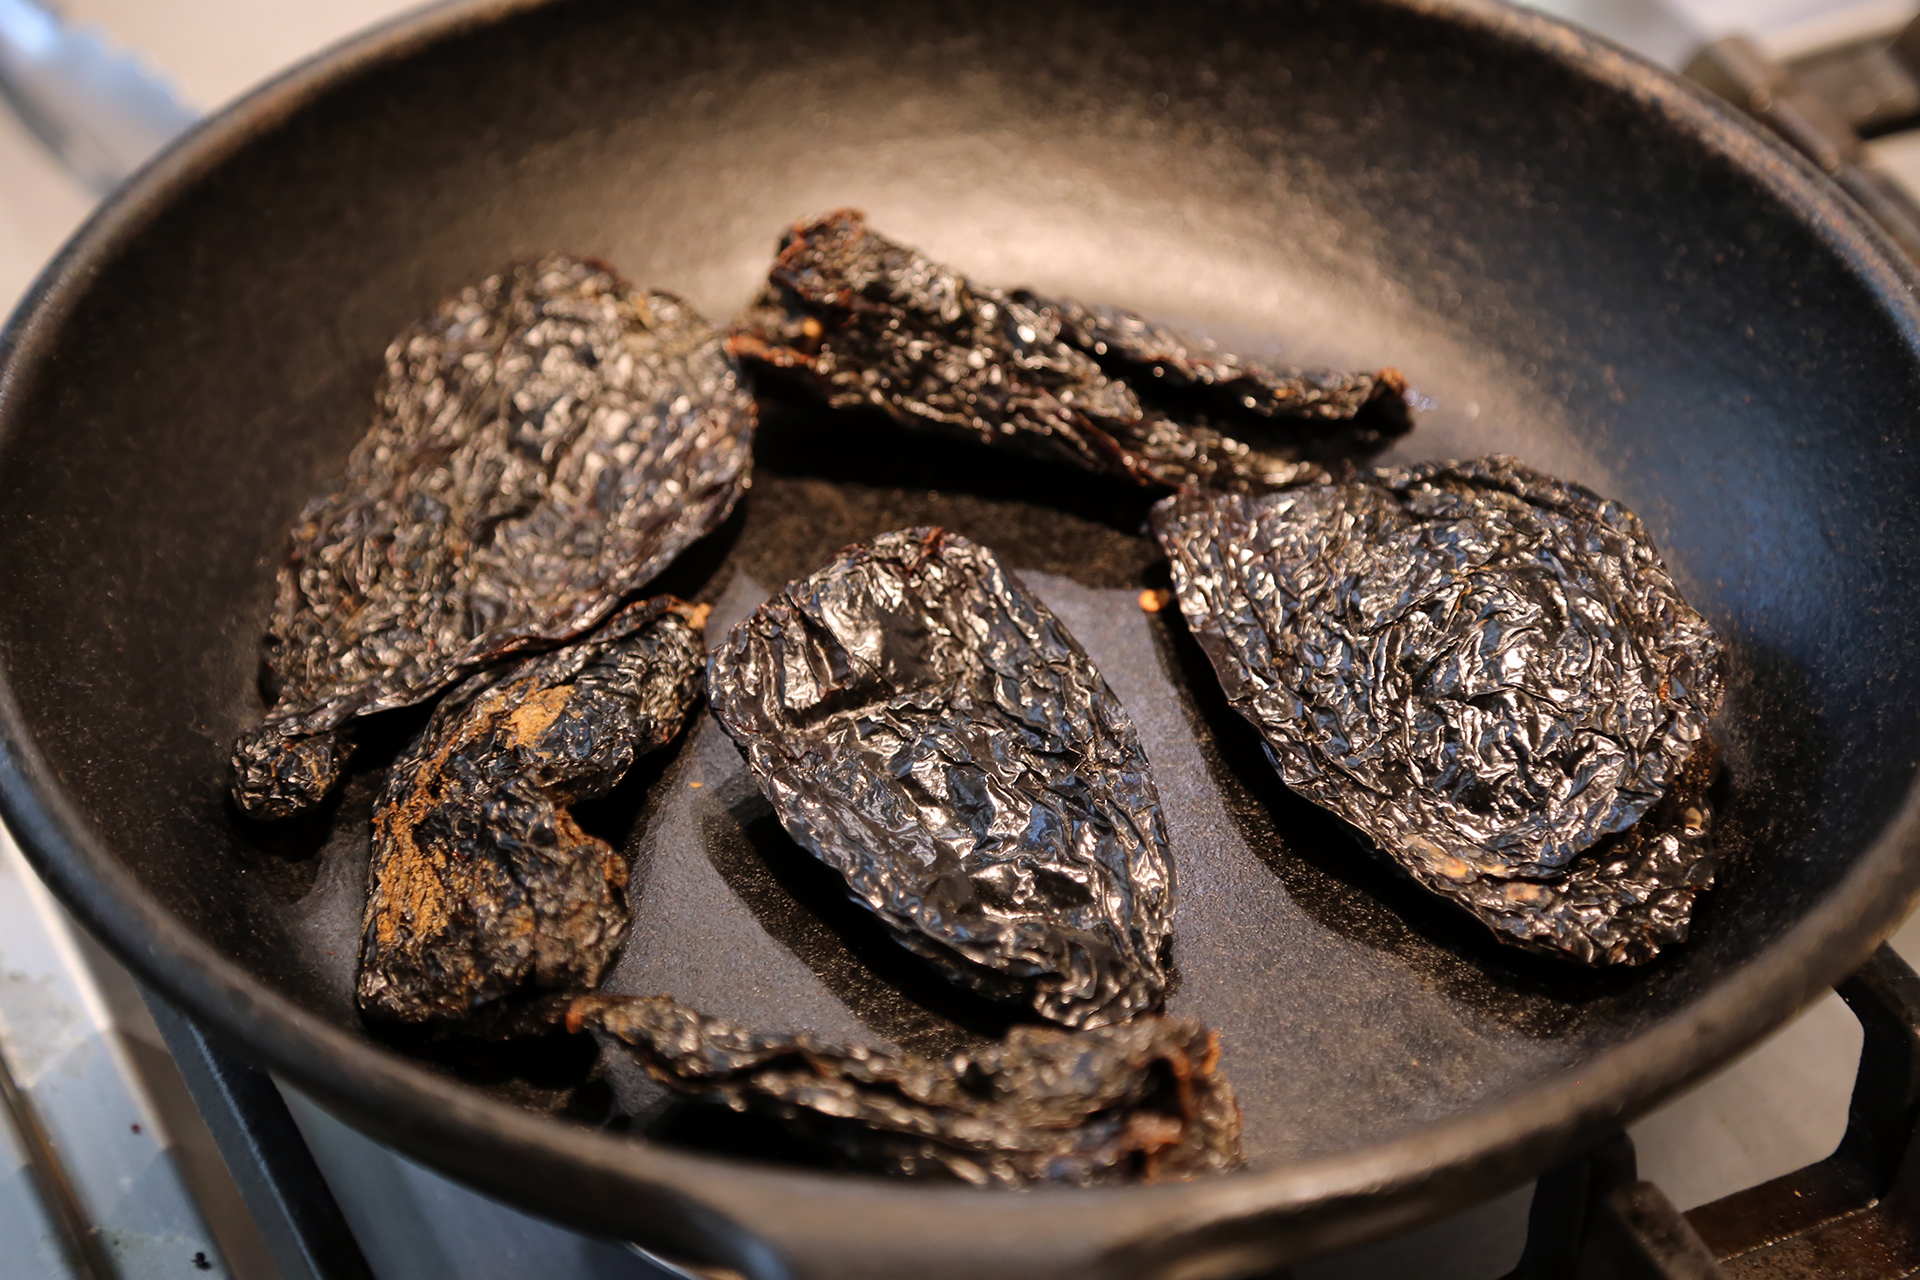 In a large skillet (with a lid) over medium heat, toast the chiles until fragrant and toasted, turning often, about 5 minutes.